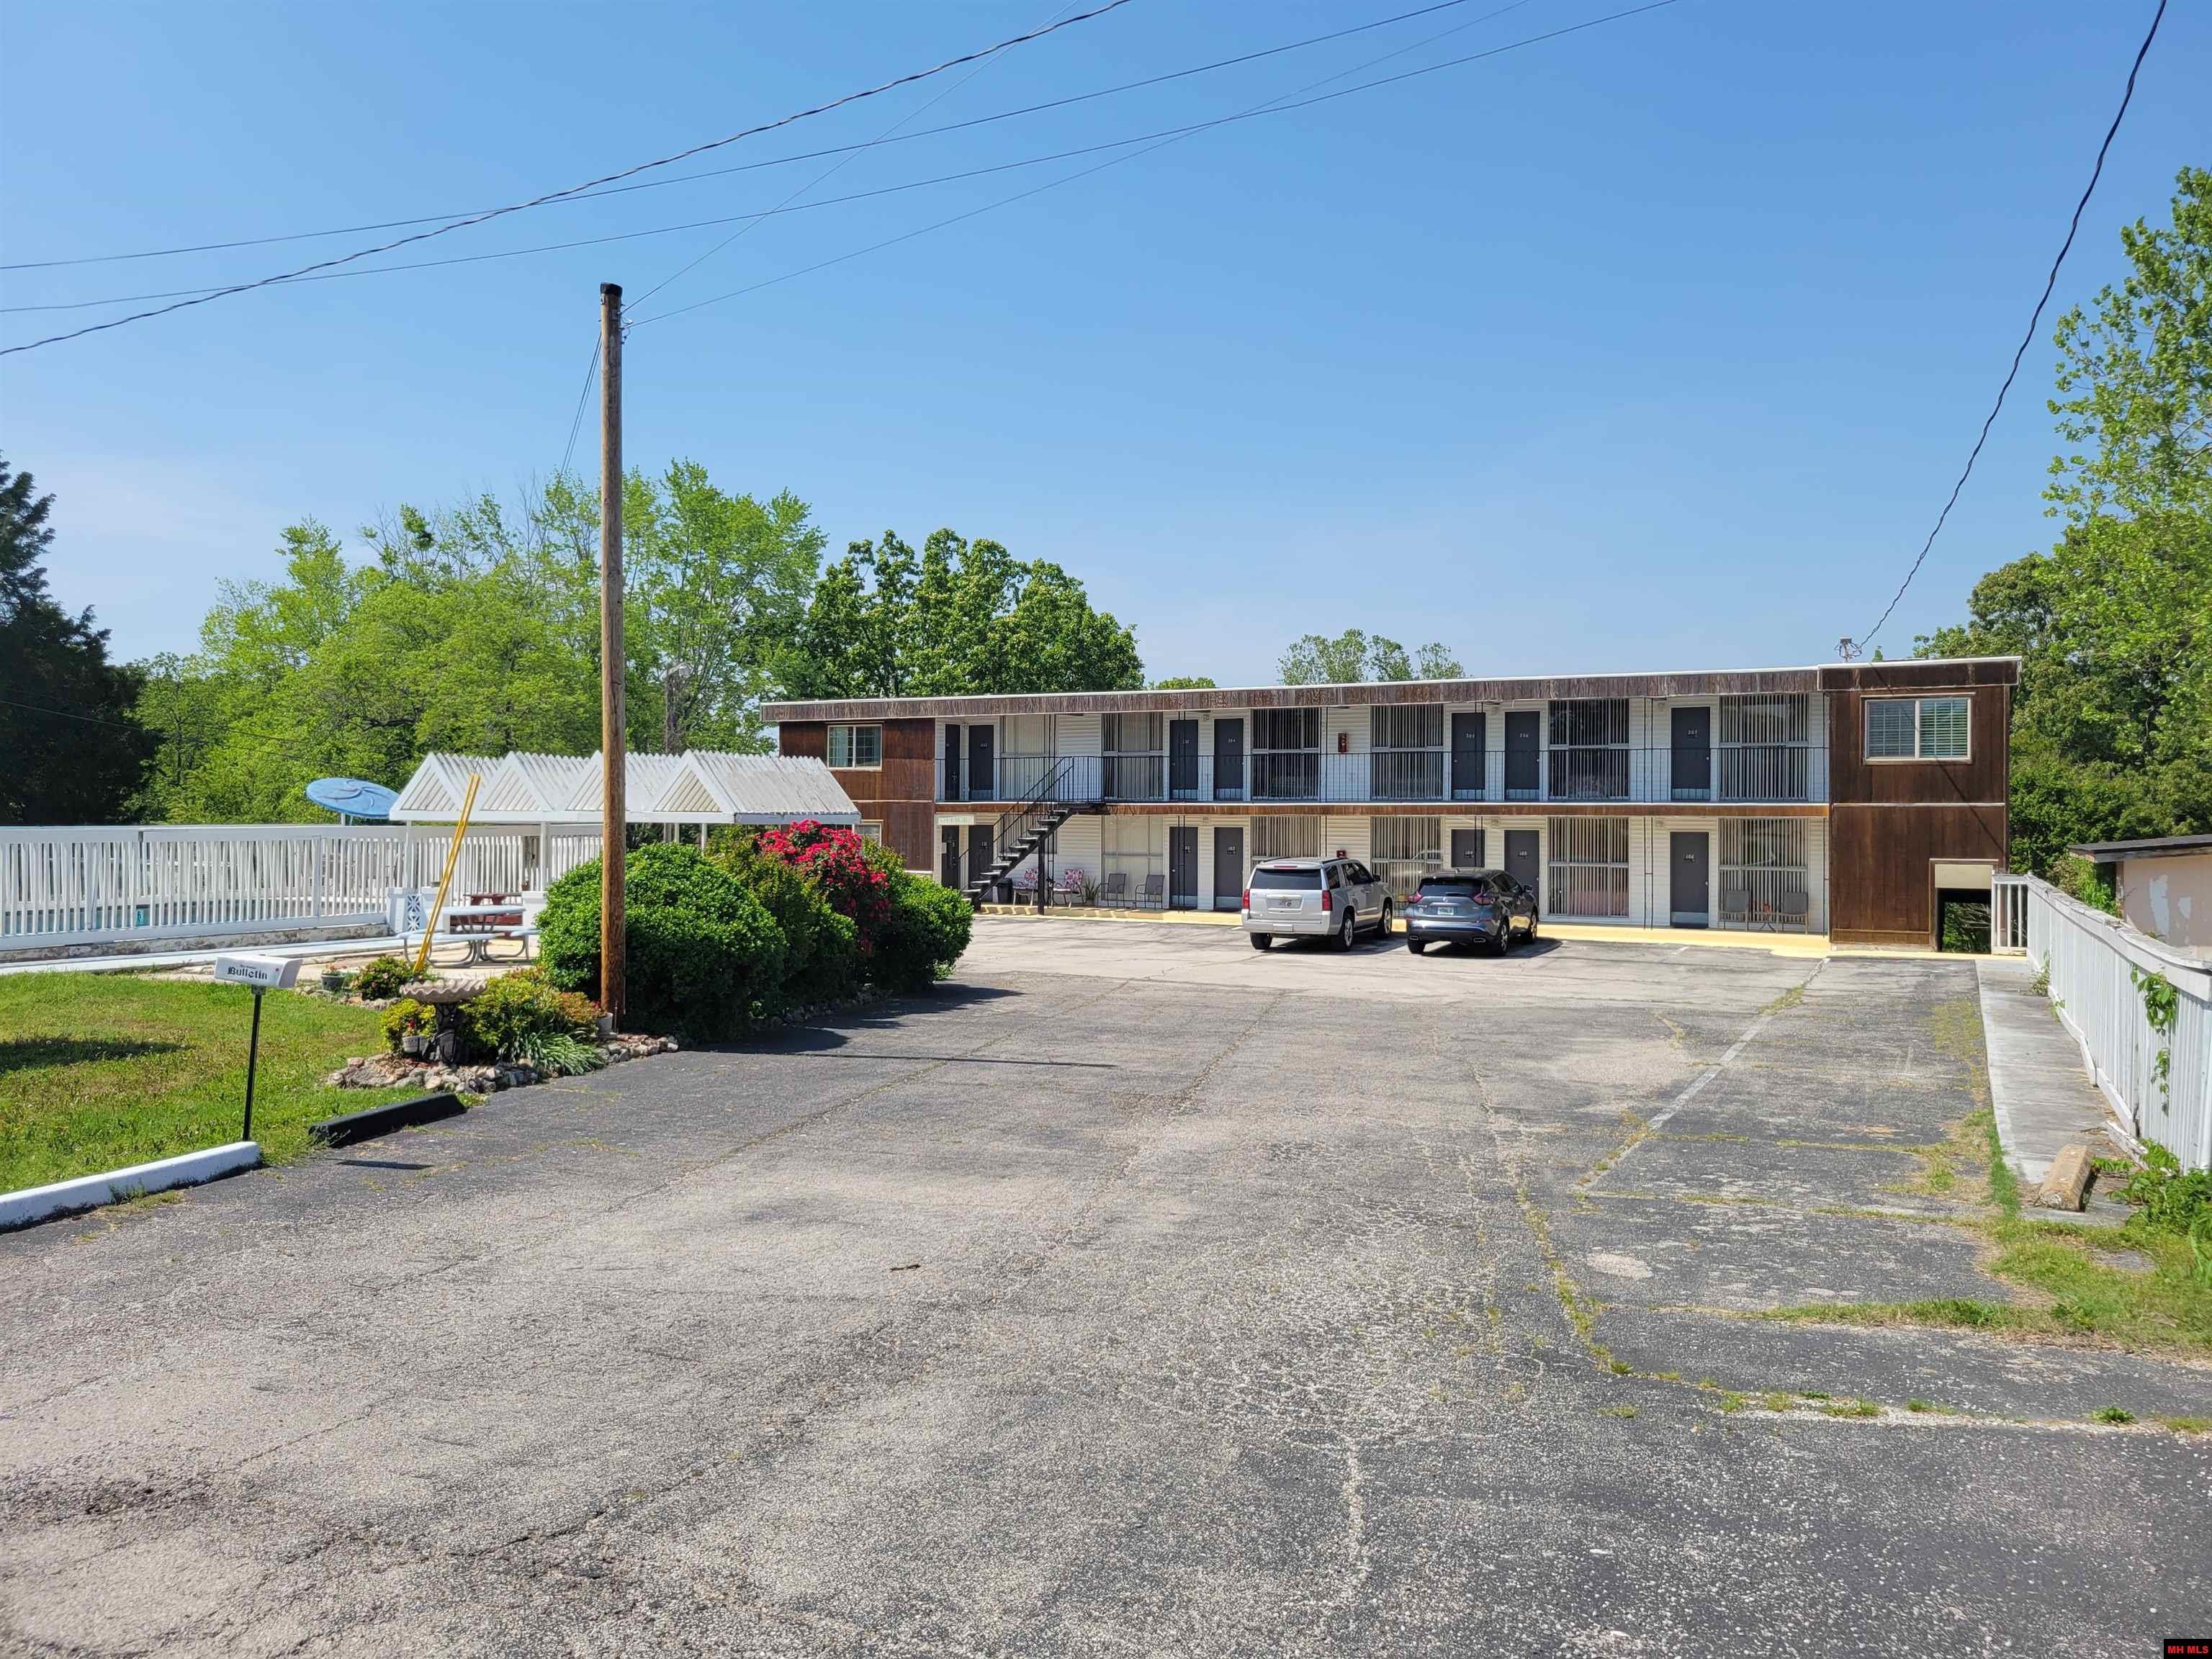 6535 HWY 178 WEST | Lakeview, AR